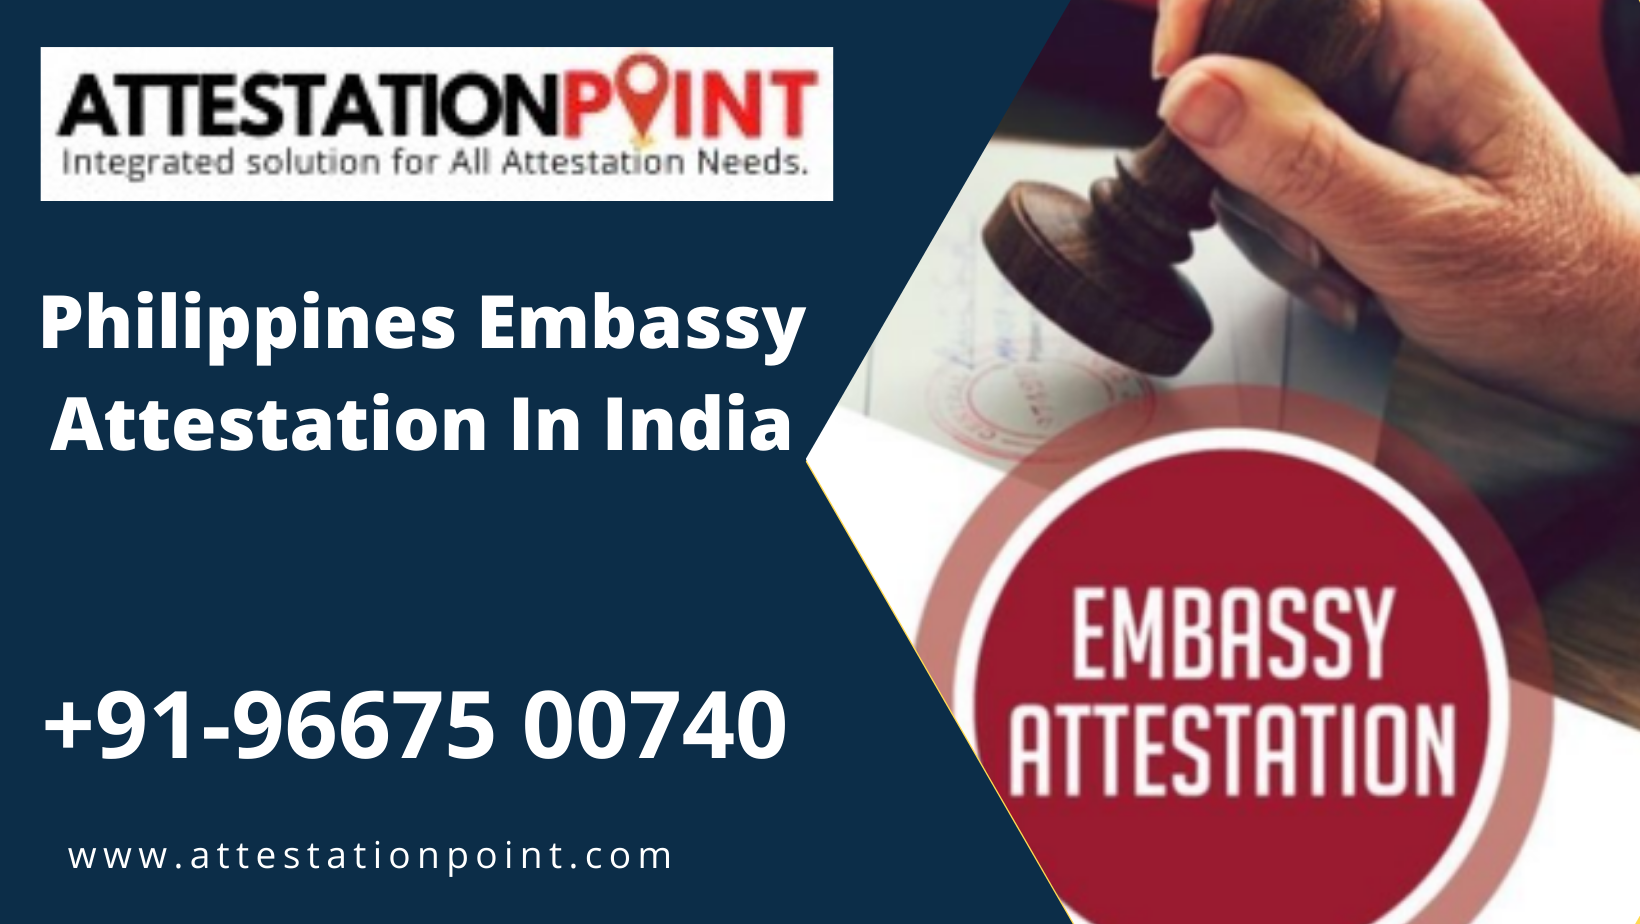 Philippines Embassy Attestation In India